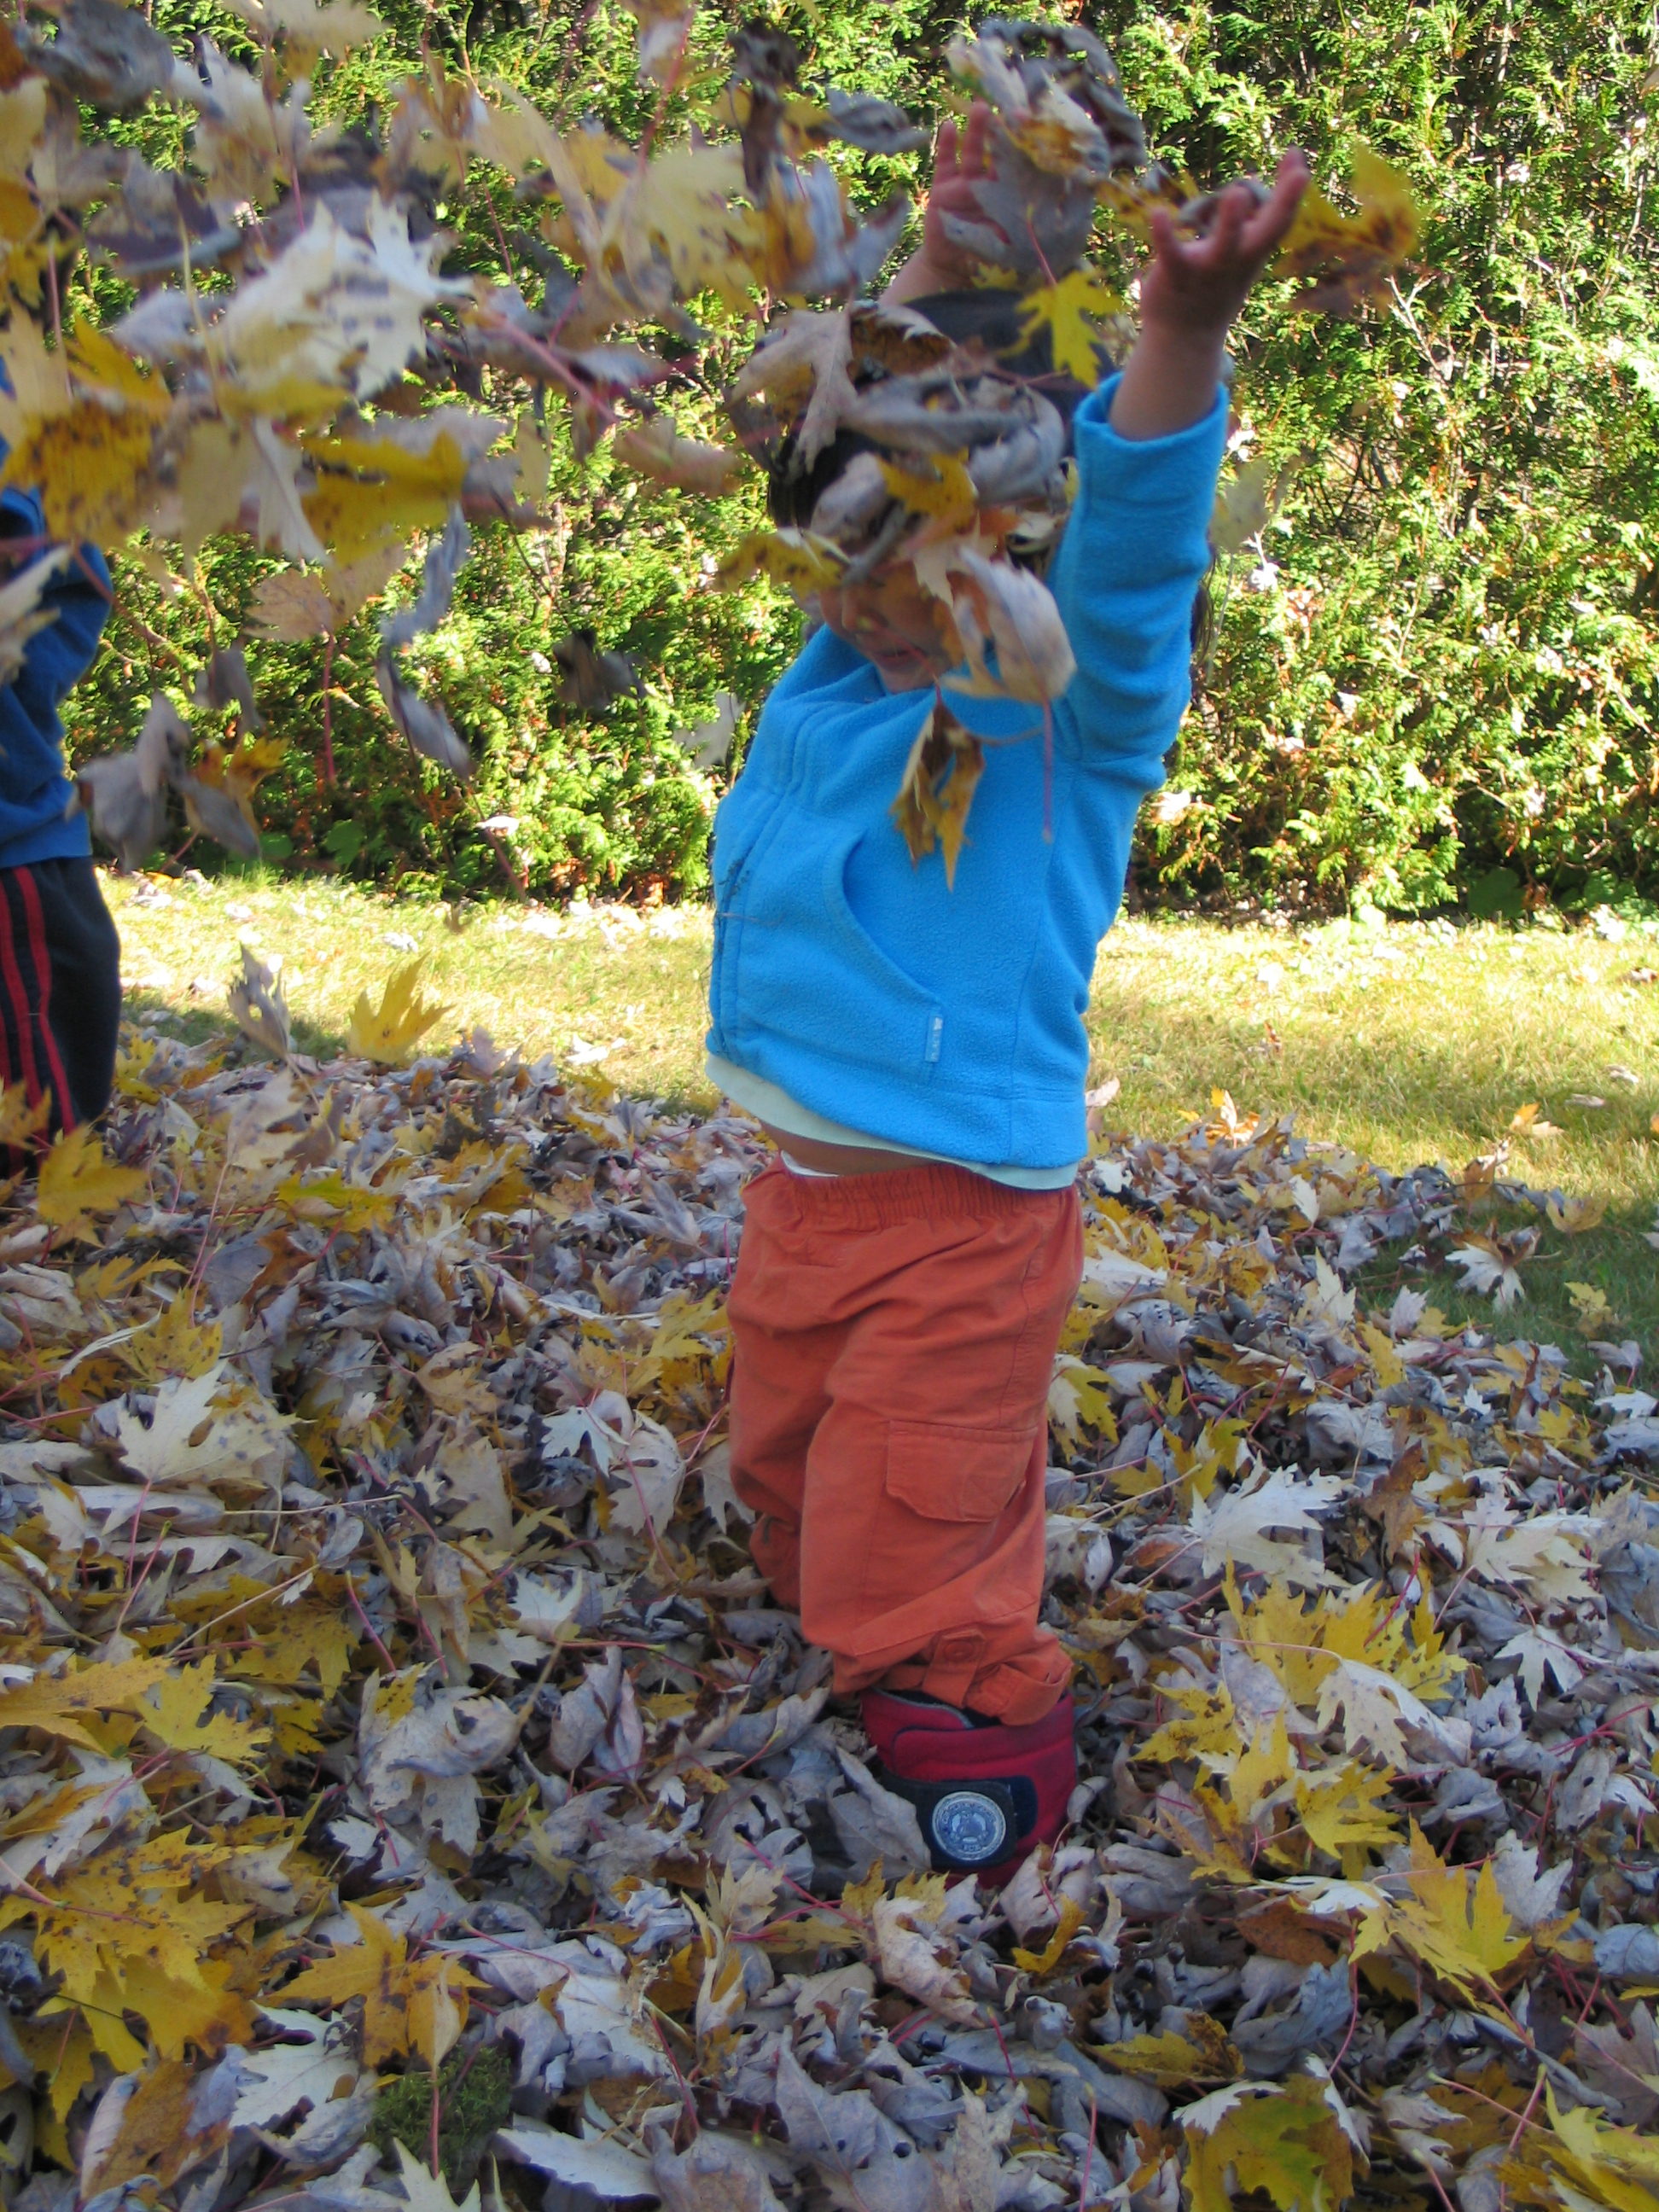 Child throwing leaves in the air.